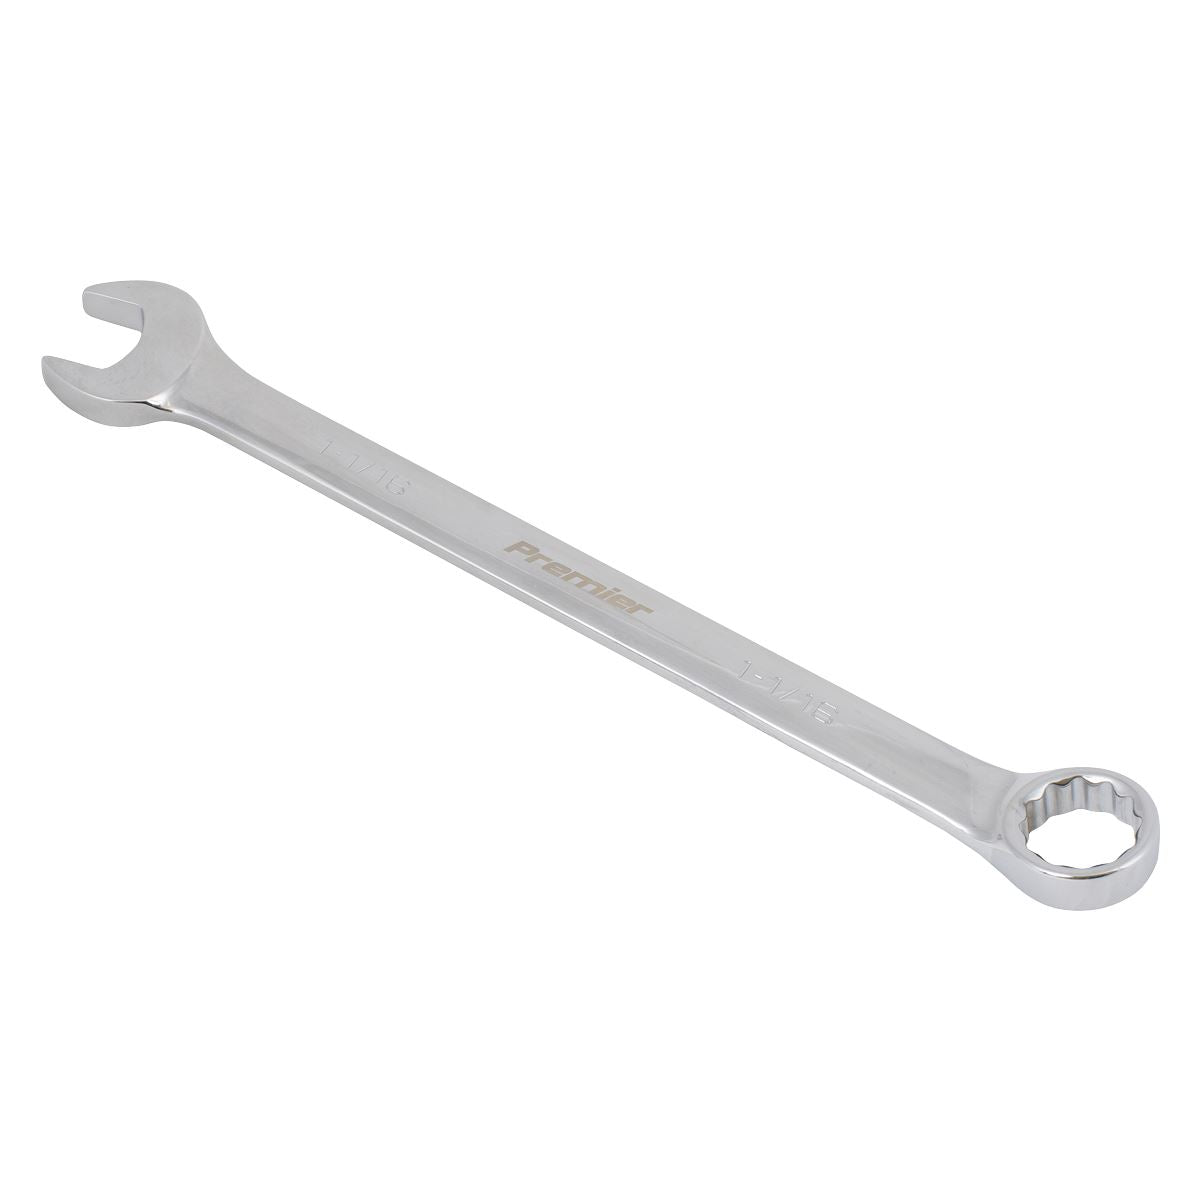 Sealey Premier Combination Spanner  1-1/16" - Imperial